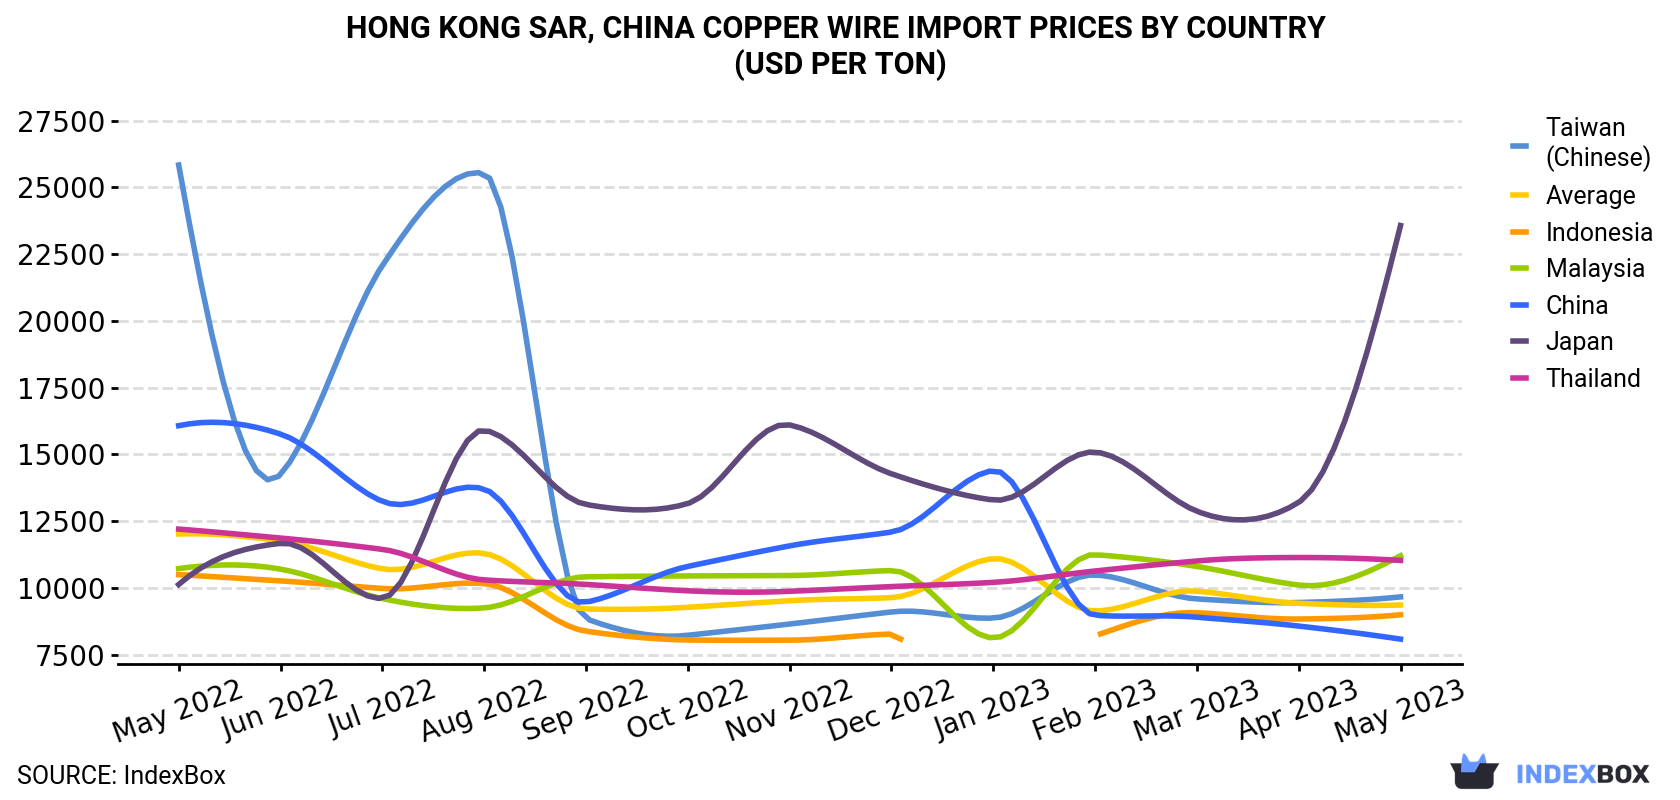 Hong Kong Copper Wire Import Prices By Country (USD Per Ton)